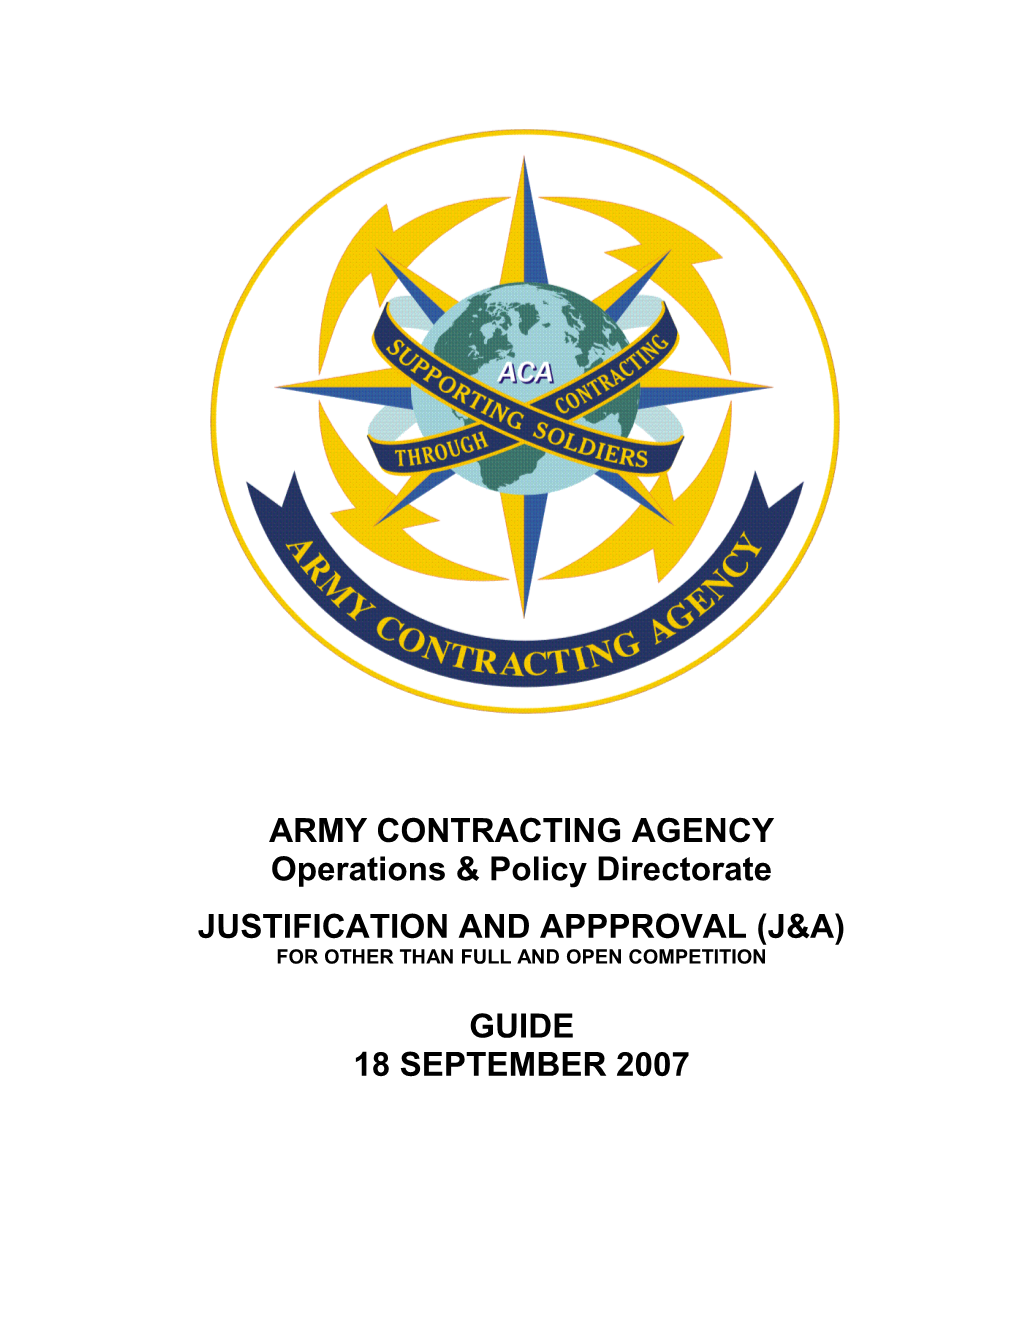 Army Contracting Agency